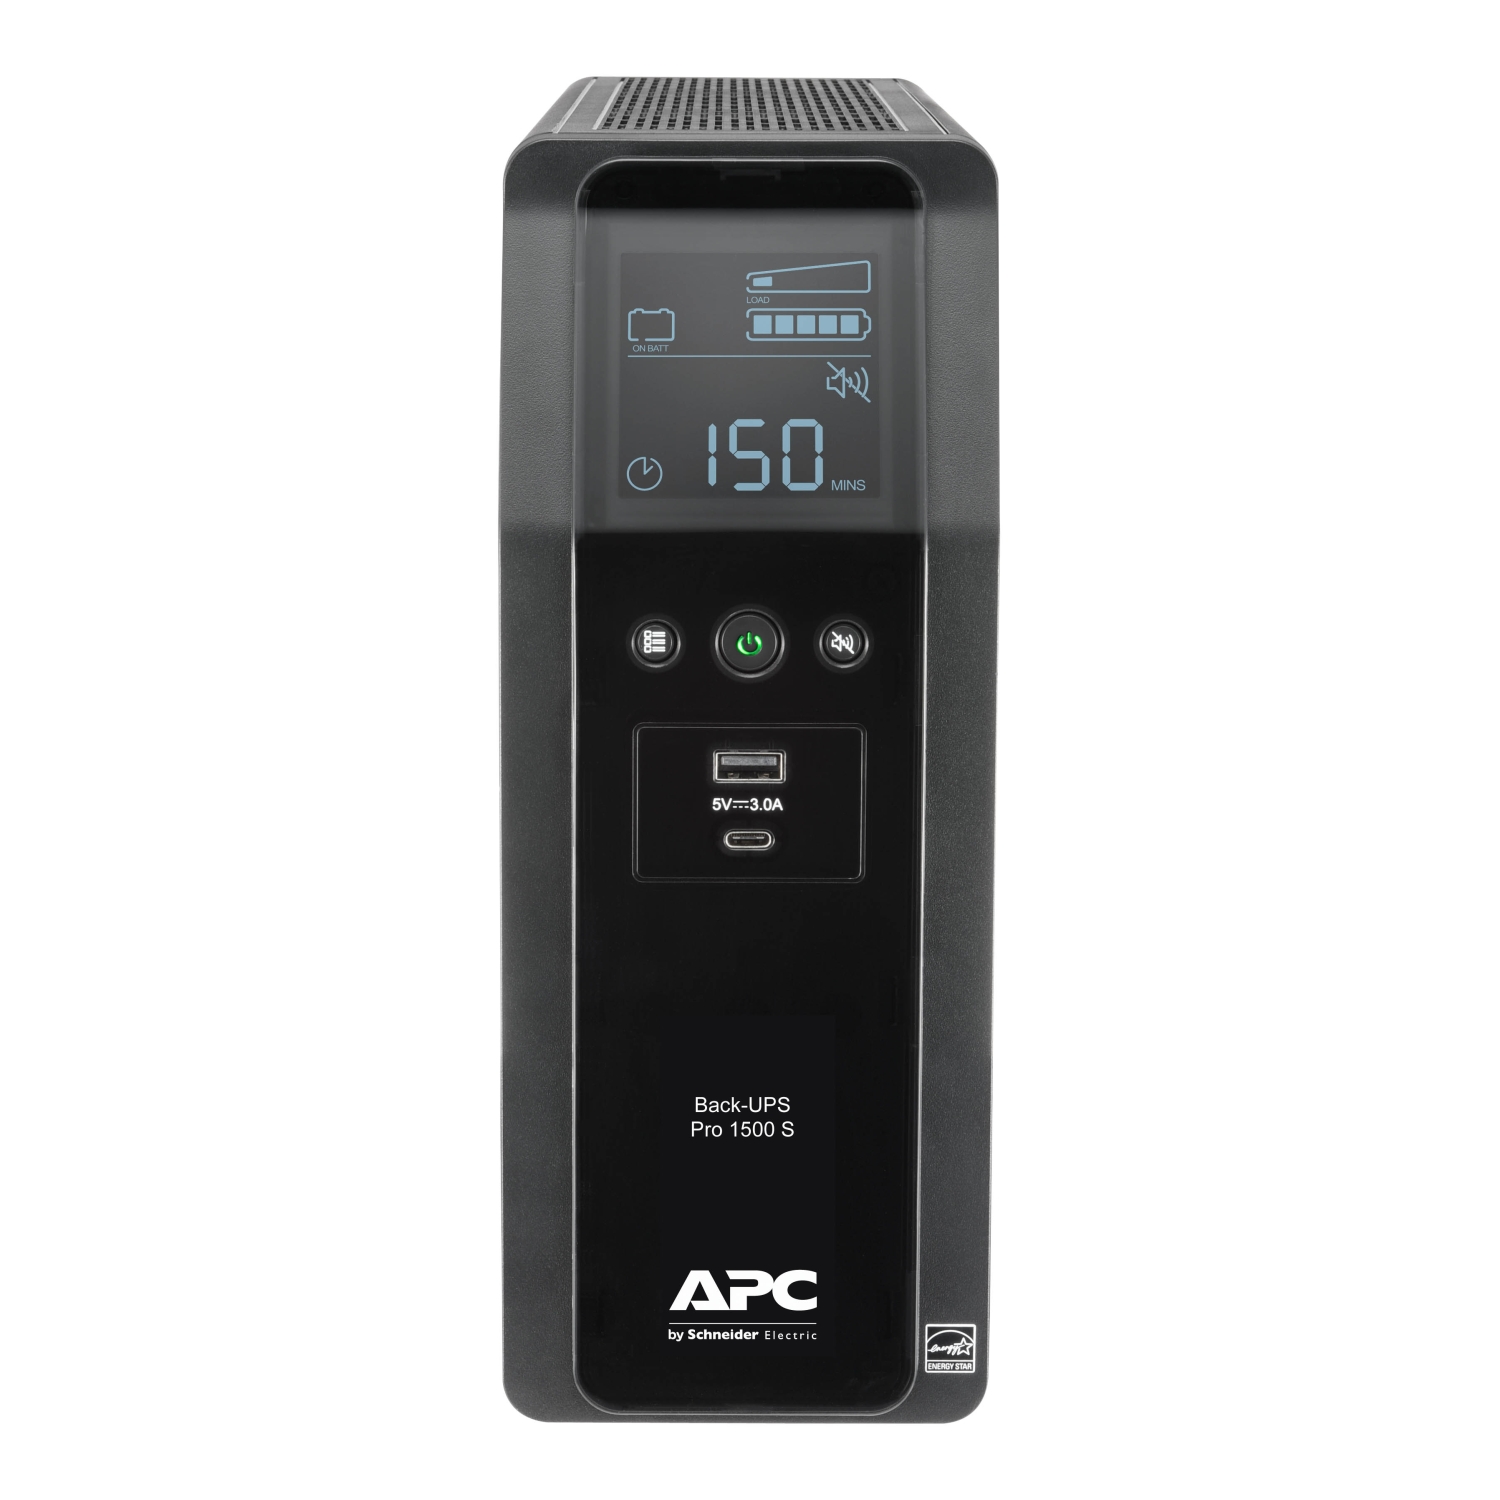 APC Back-UPS Pro 1500S, 1500VA, SineWave, 10 Outlets, 2 USB Charging Ports,  AVR, LCD interface - BR1500MS